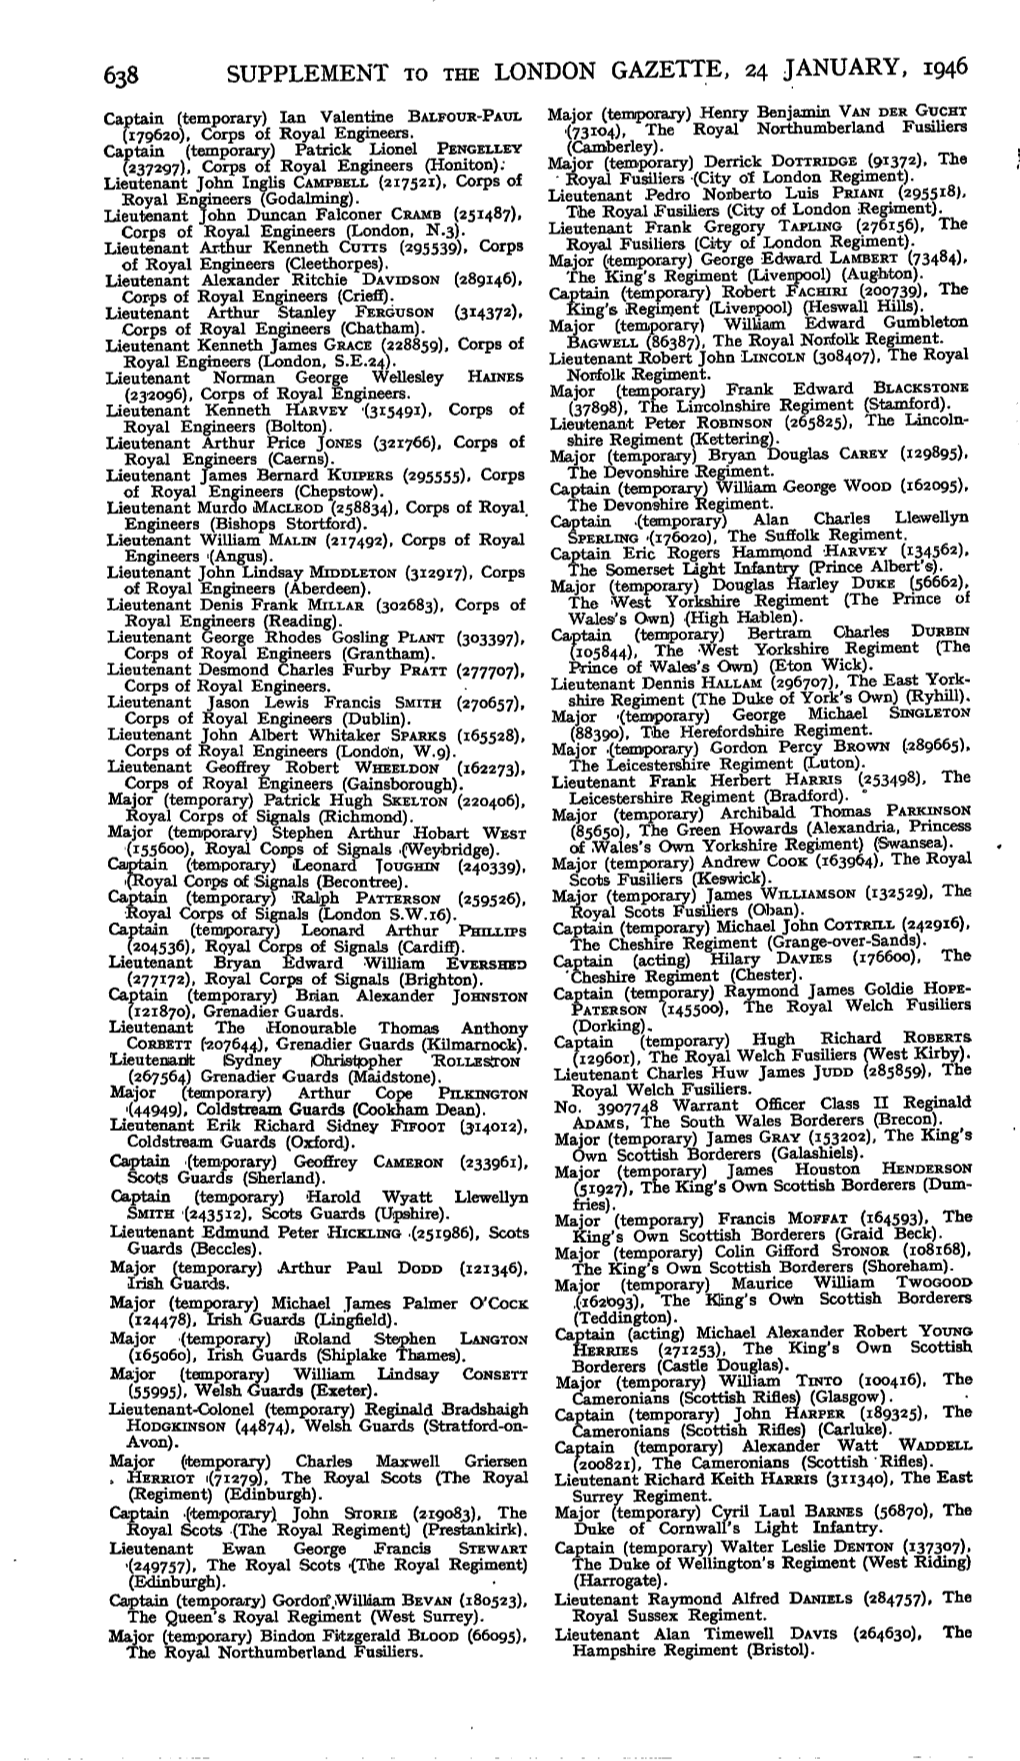 638 Supplement to the London Gazette, 24 January, 1946